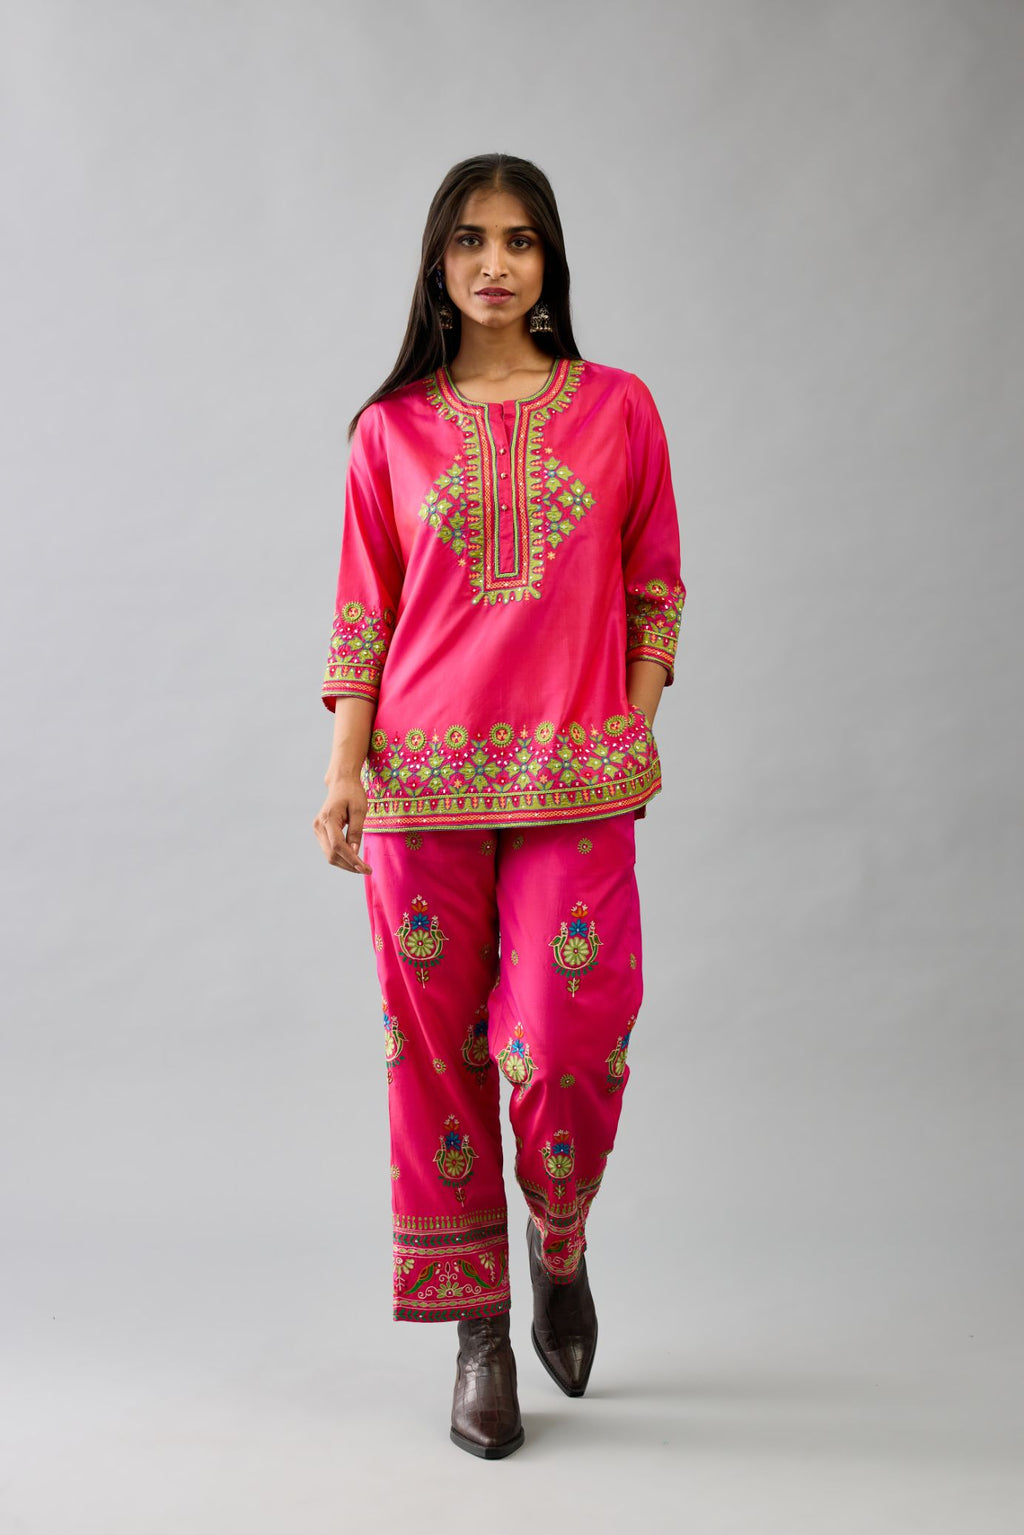 Fuchsia silk embroidered short top set with 3/4th sleeves.